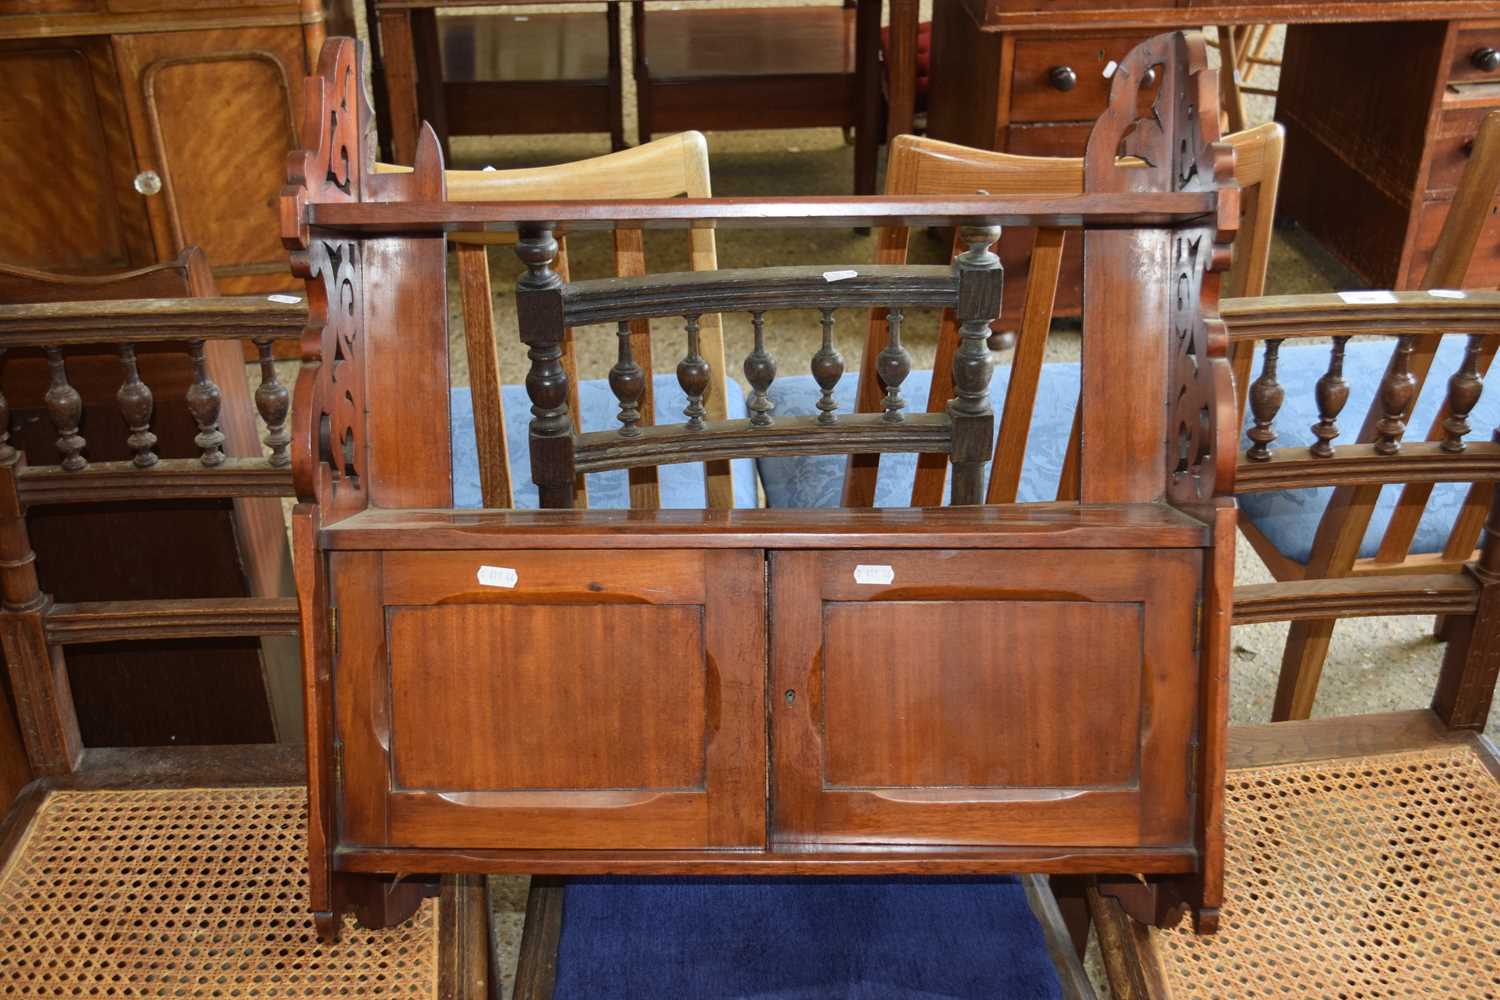 Late 19th Century mahogany combination wall shelf and cupboard with fretwork ends